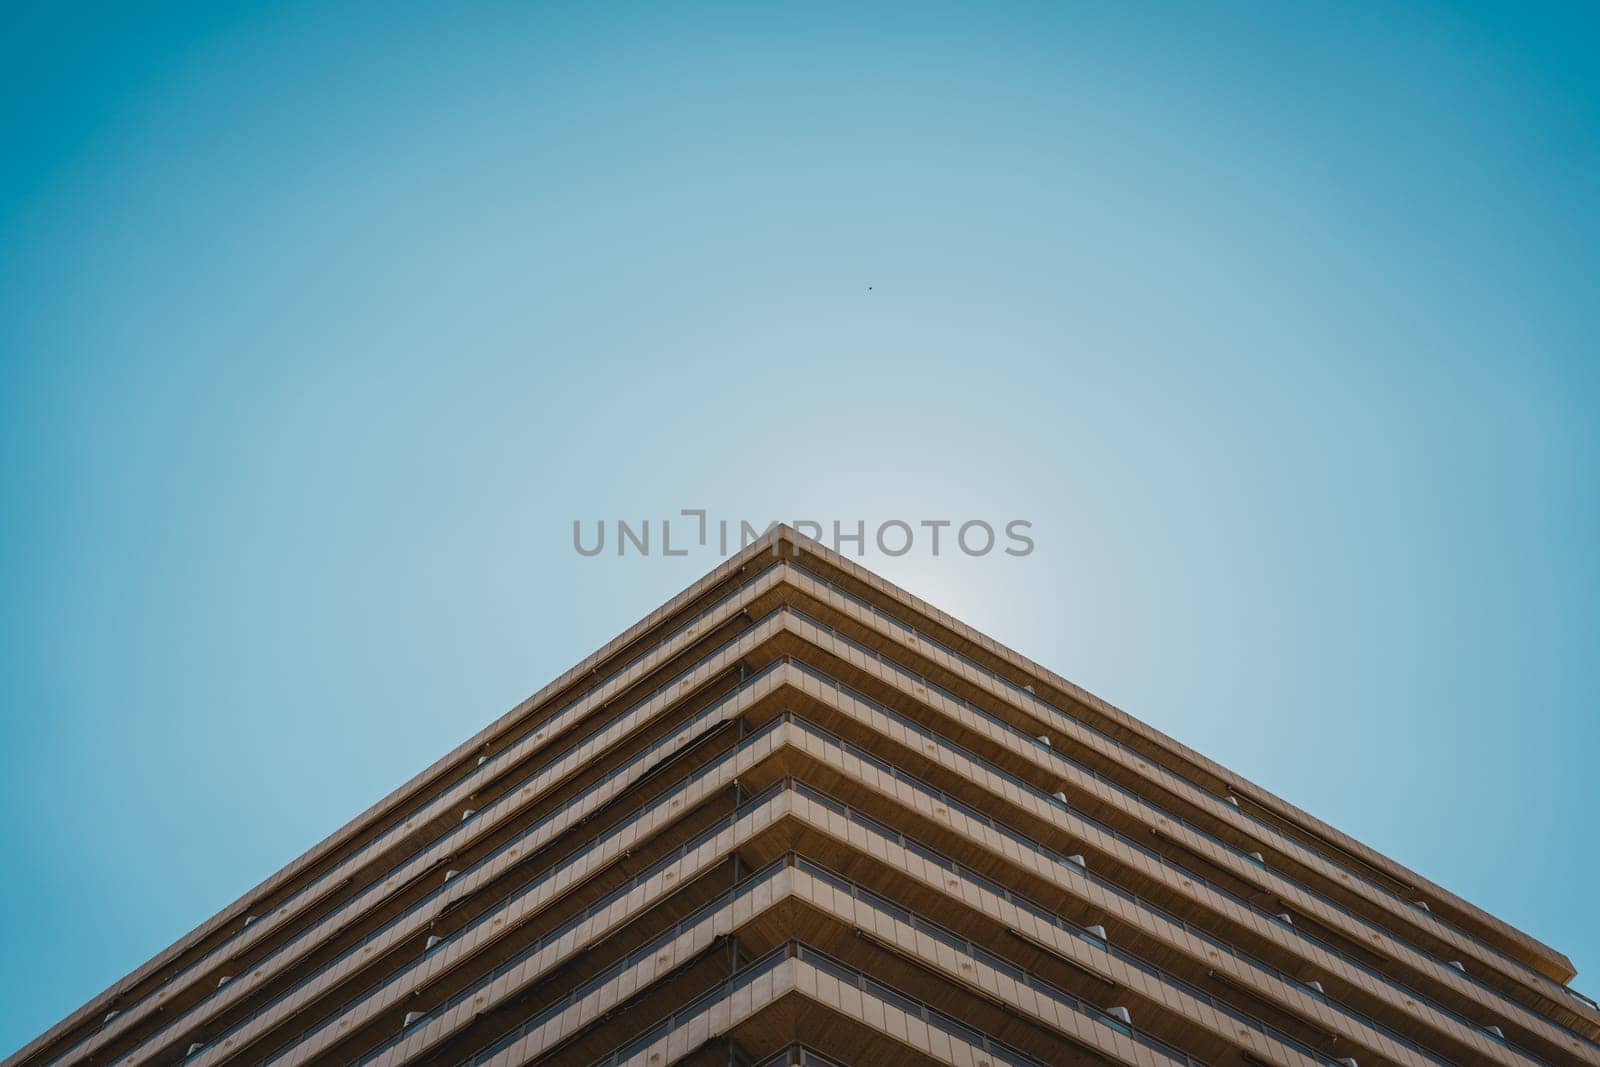 Architectural Perspective of a Building by Popov